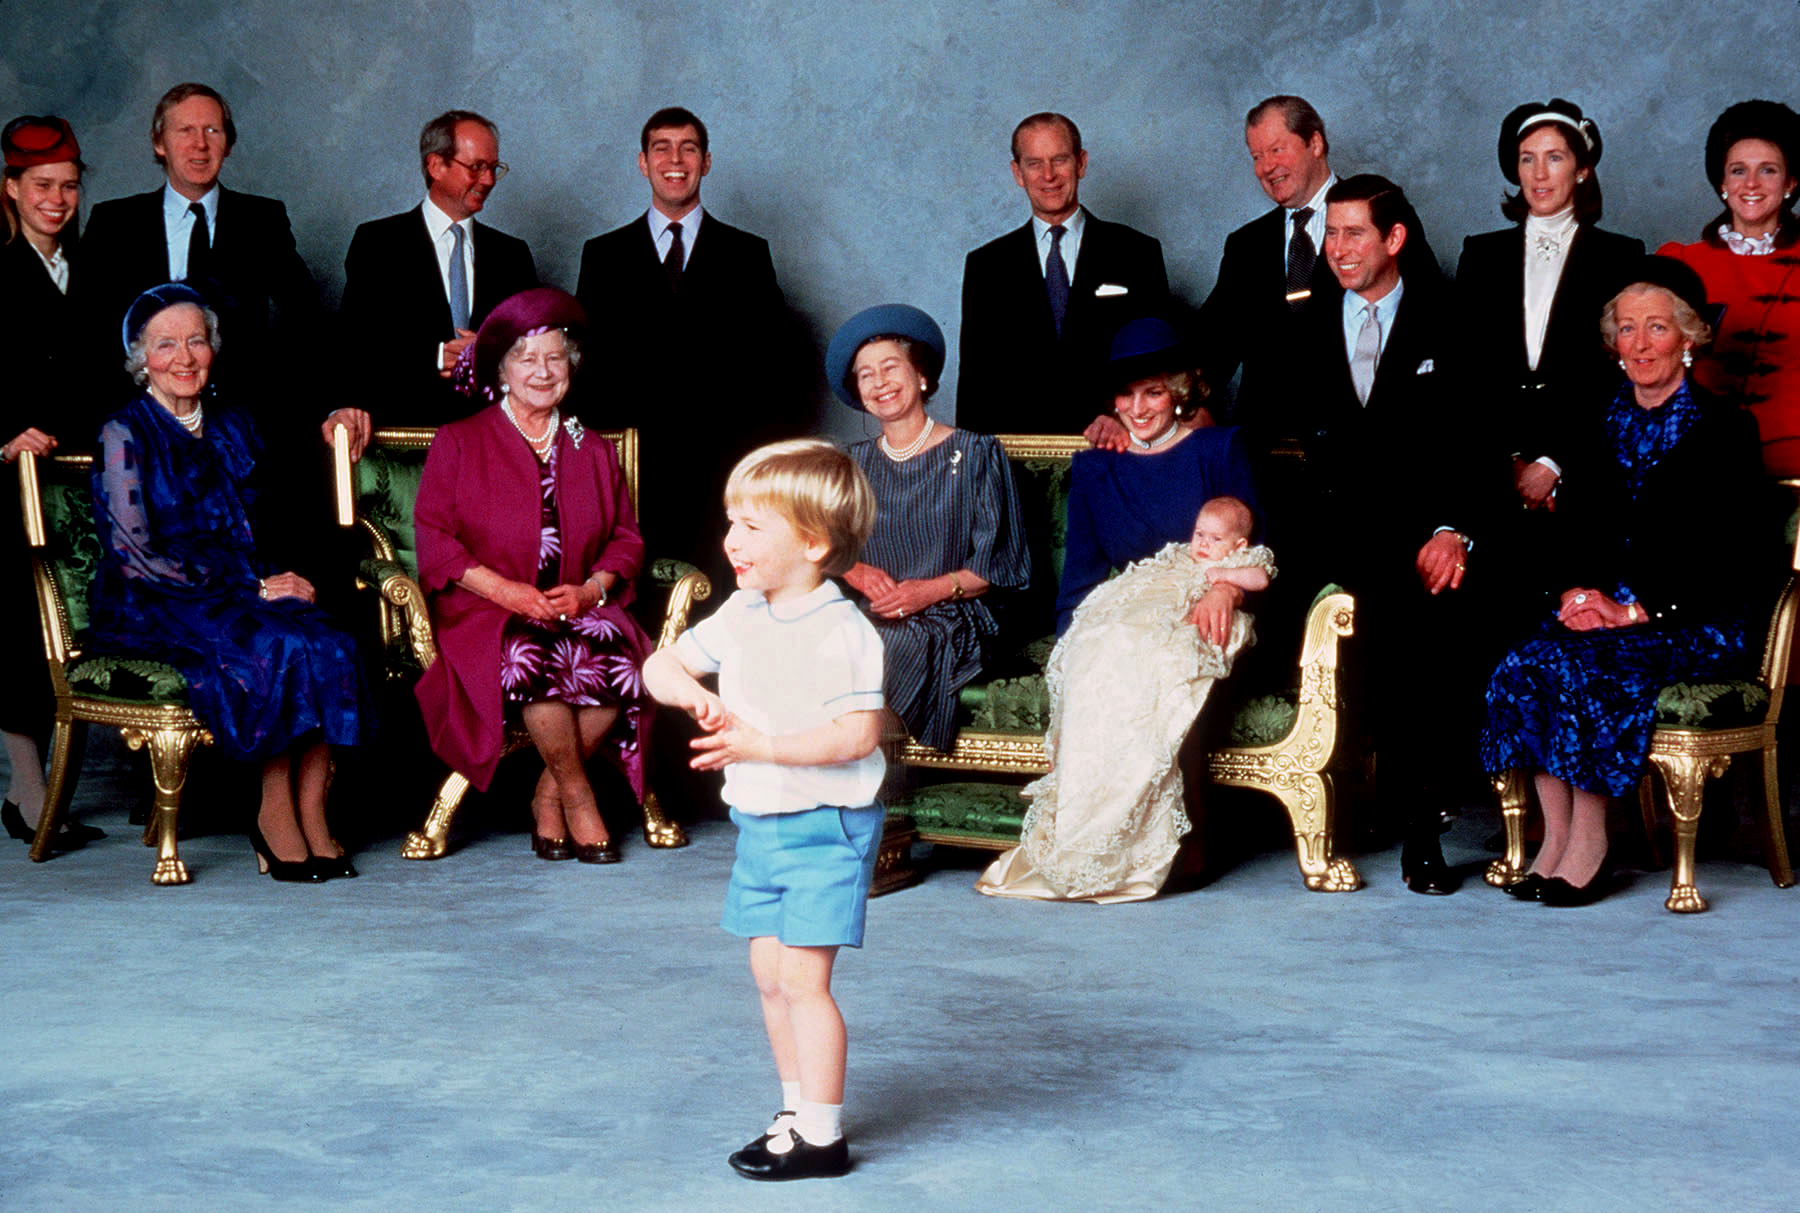 PHOTO: Surrounded by royal relatives and godparents who are amused at the antics of young Prince William, Prince Harry is christened at Windsor Castle, Dec. 21, 1984 in Windsor, England.